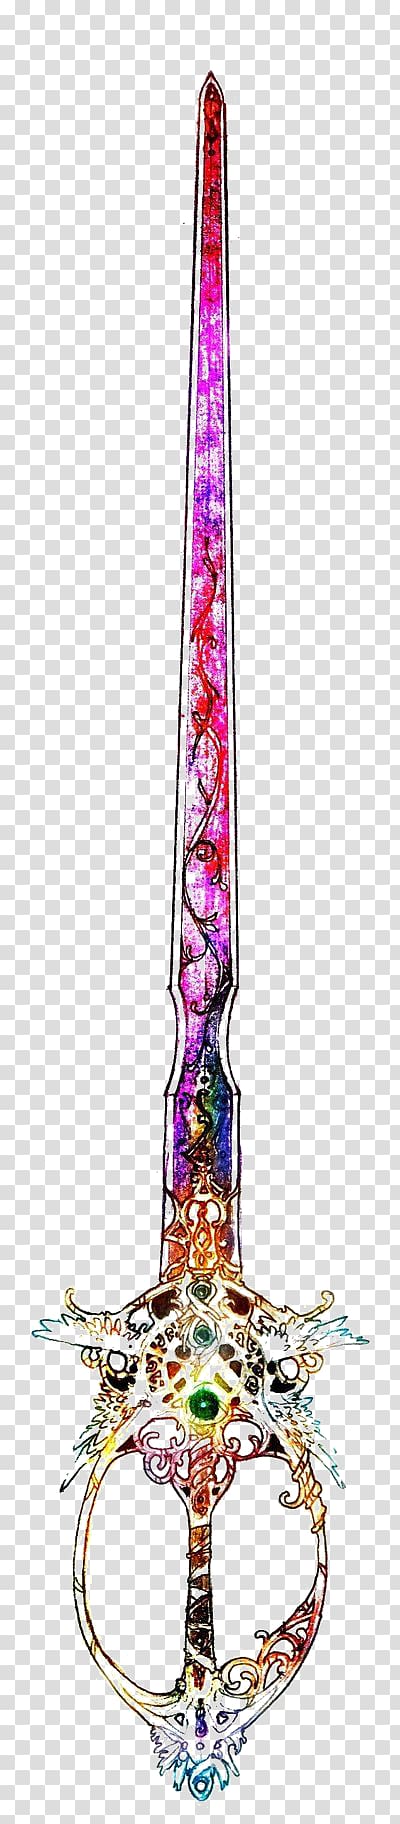 Undertale Shadow the Hedgehog Weapon, Game swords transparent background PNG clipart